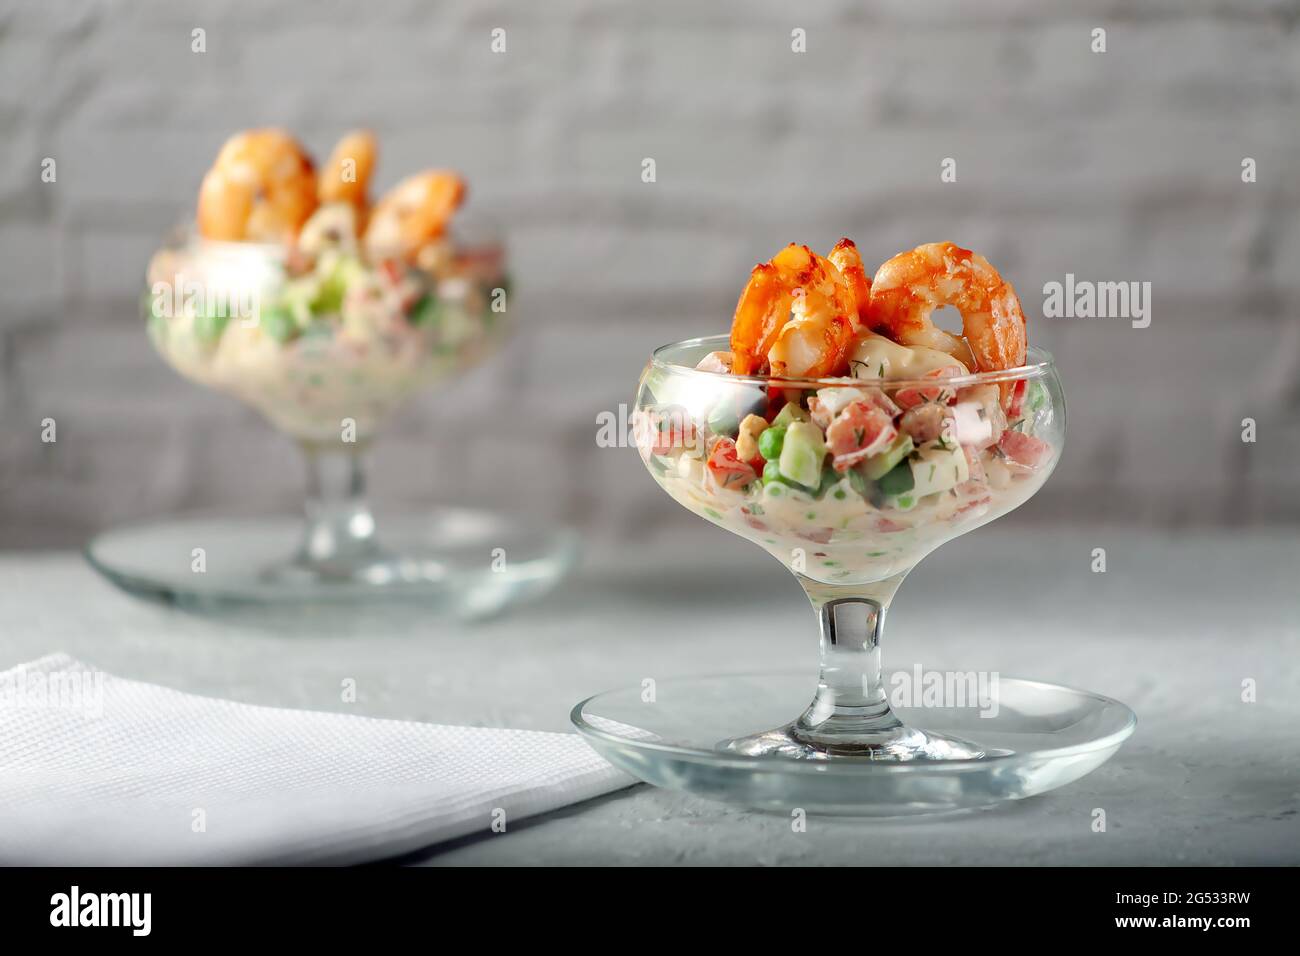 Diet food. Fresh vegetable salad with shrimps. Stock Photo